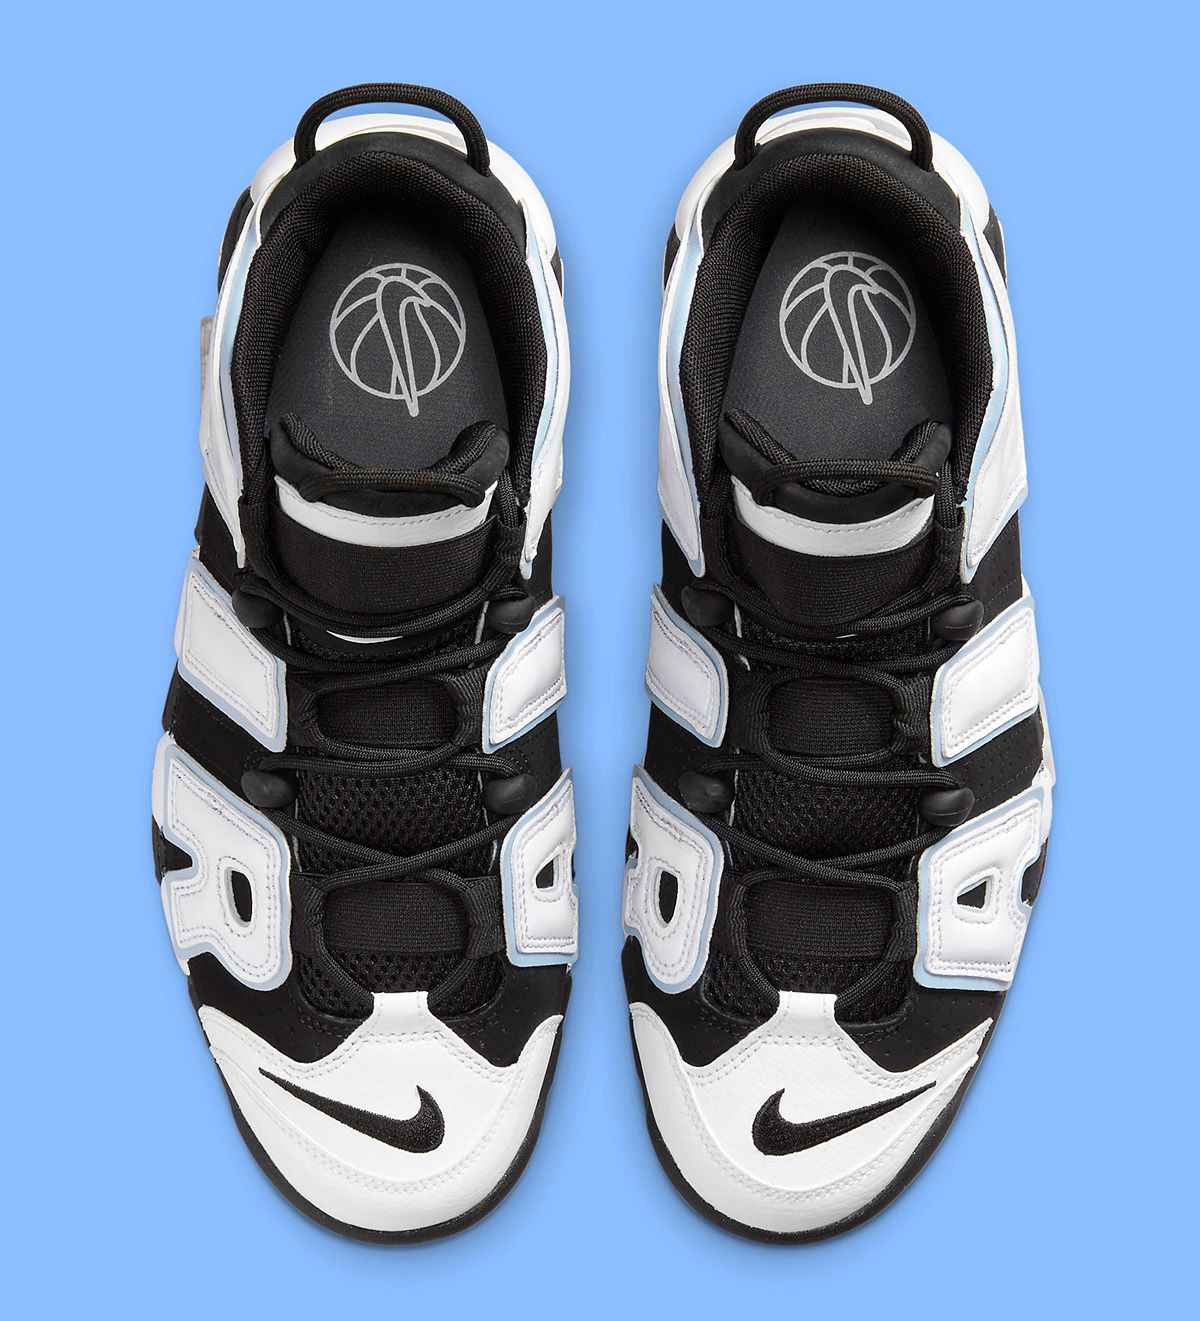 Where to Buy the Nike Air More Uptempo “Cobalt Bliss” | House of Heat°